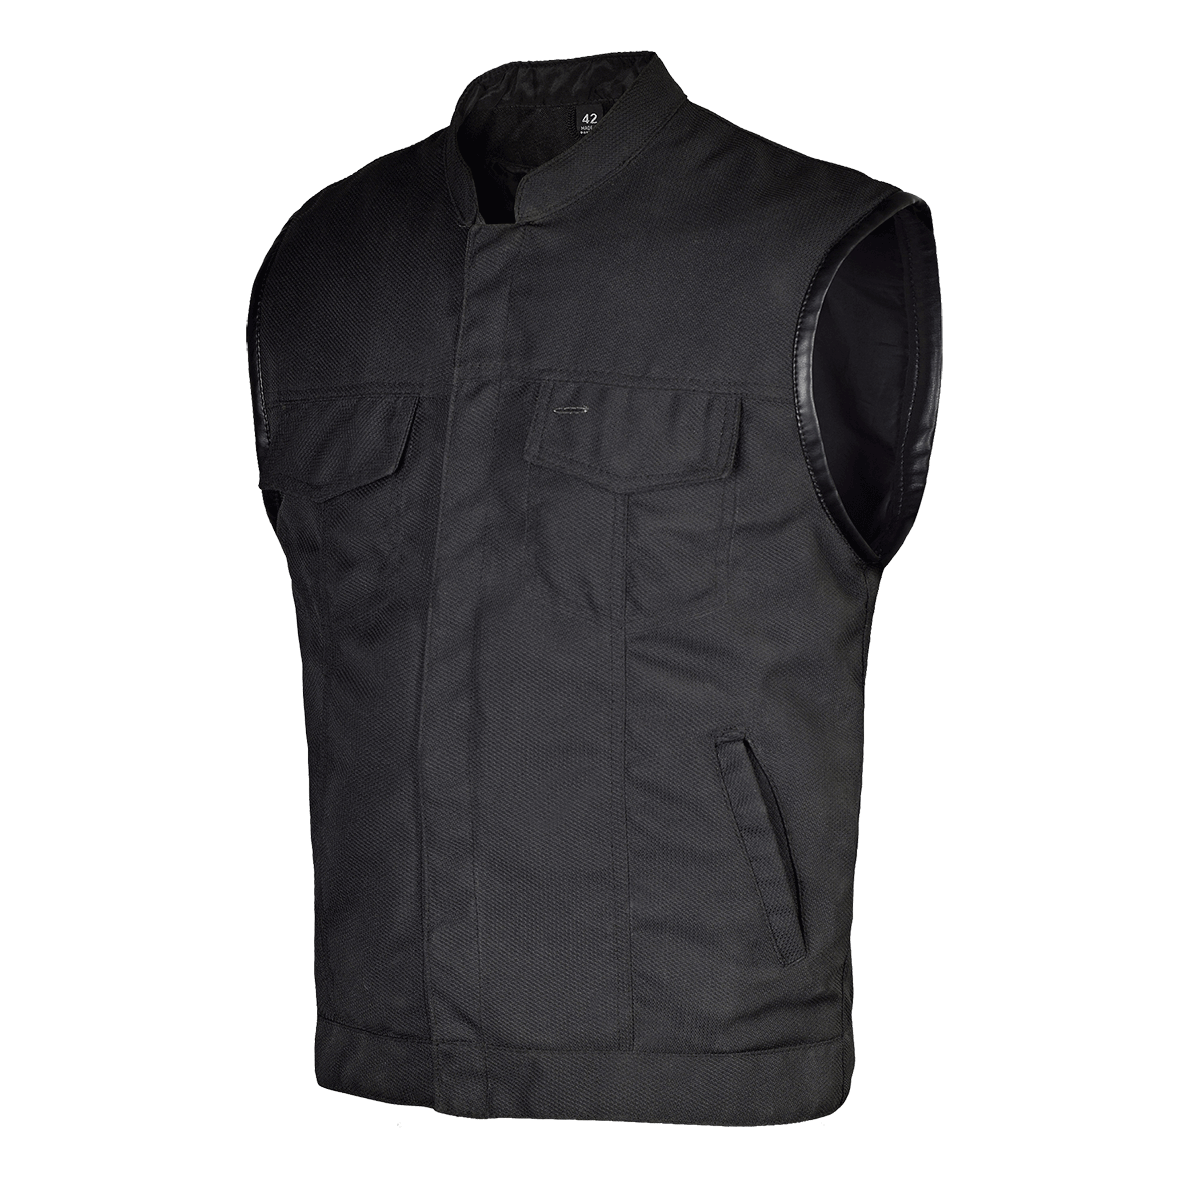 VL1914 Heavy Duty Textile Club Vest with Snaps And Zipper Closure